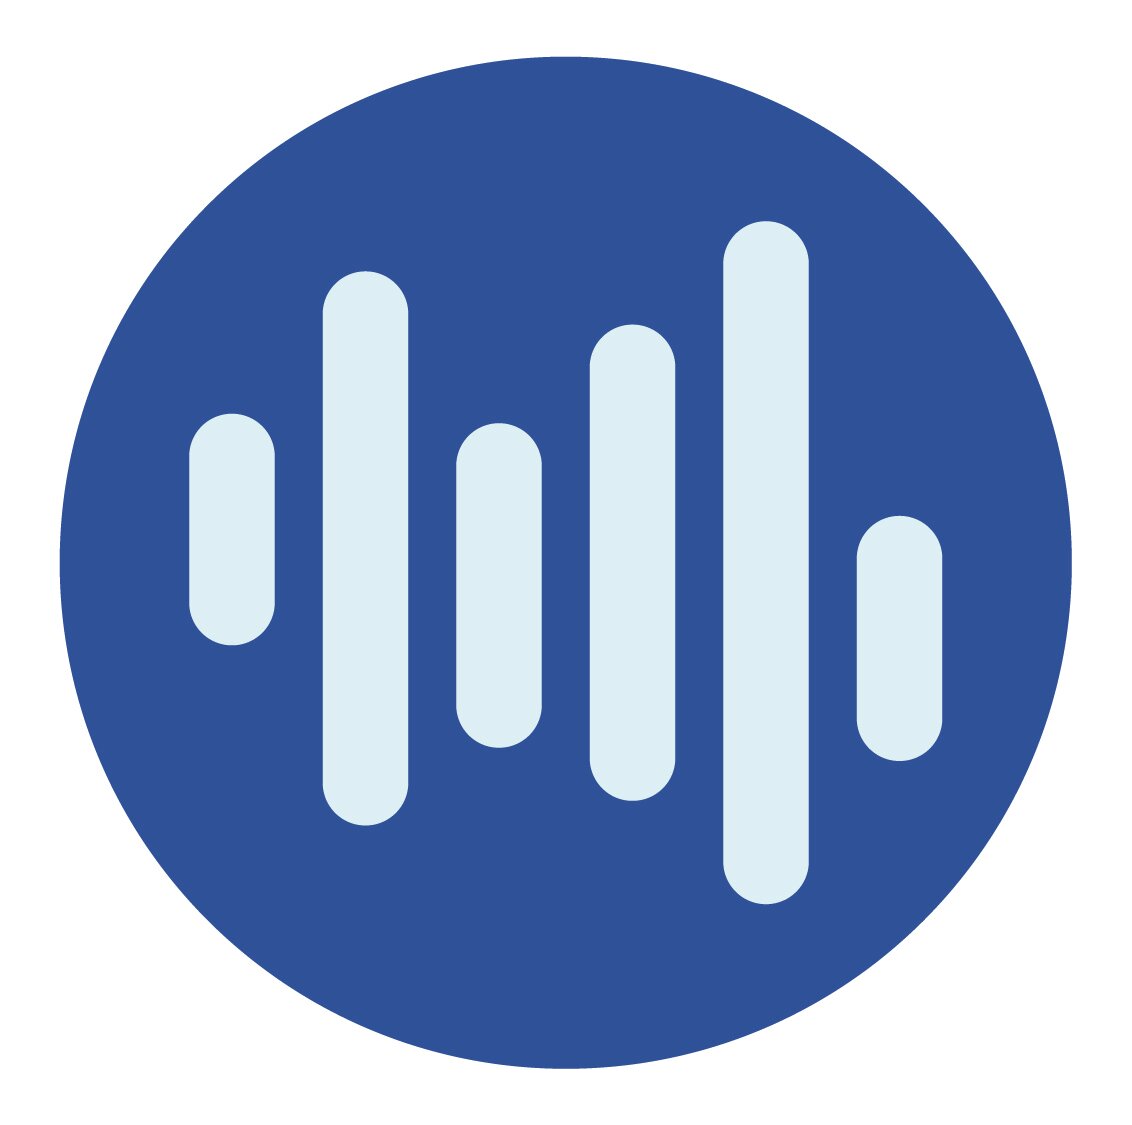 In Tune logo: blue circle with white bar waveforms